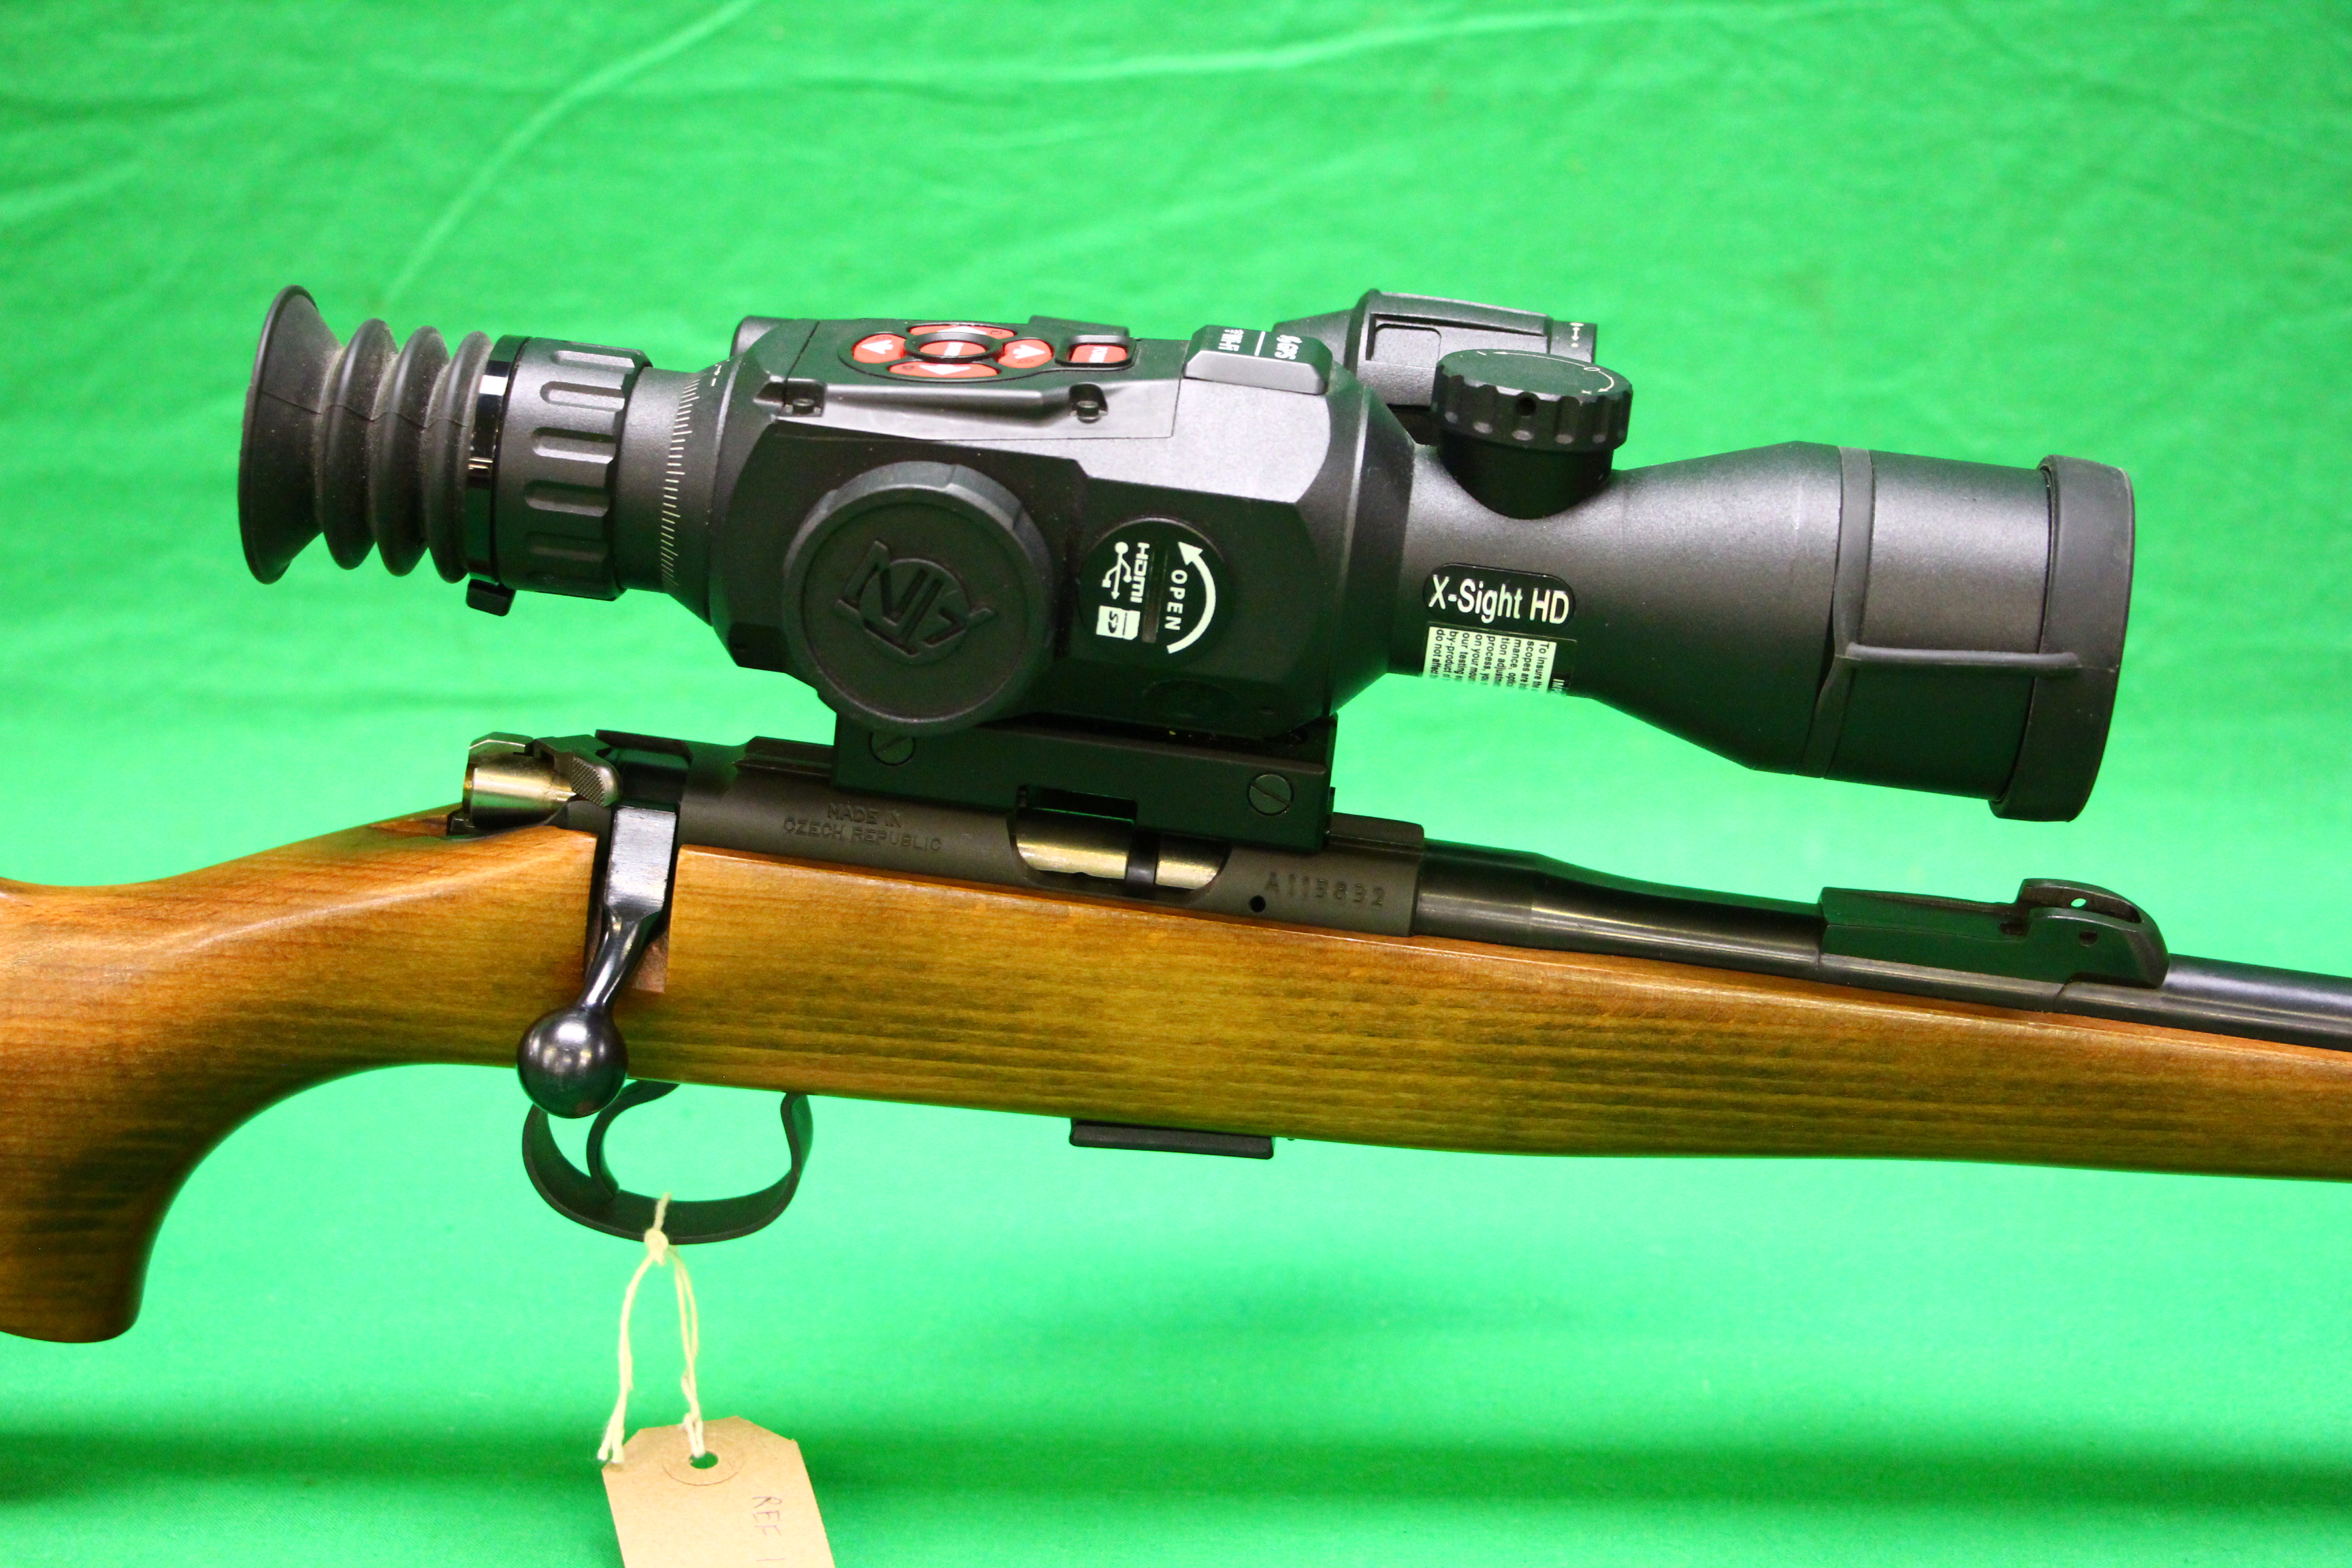 CZ 452-ZEKM .22 BOLT ACTION RIFLE COMPLETE WITH SOUND MODERATOR # NONE AND X SIGHT 2 HD SCOPE - Image 8 of 15